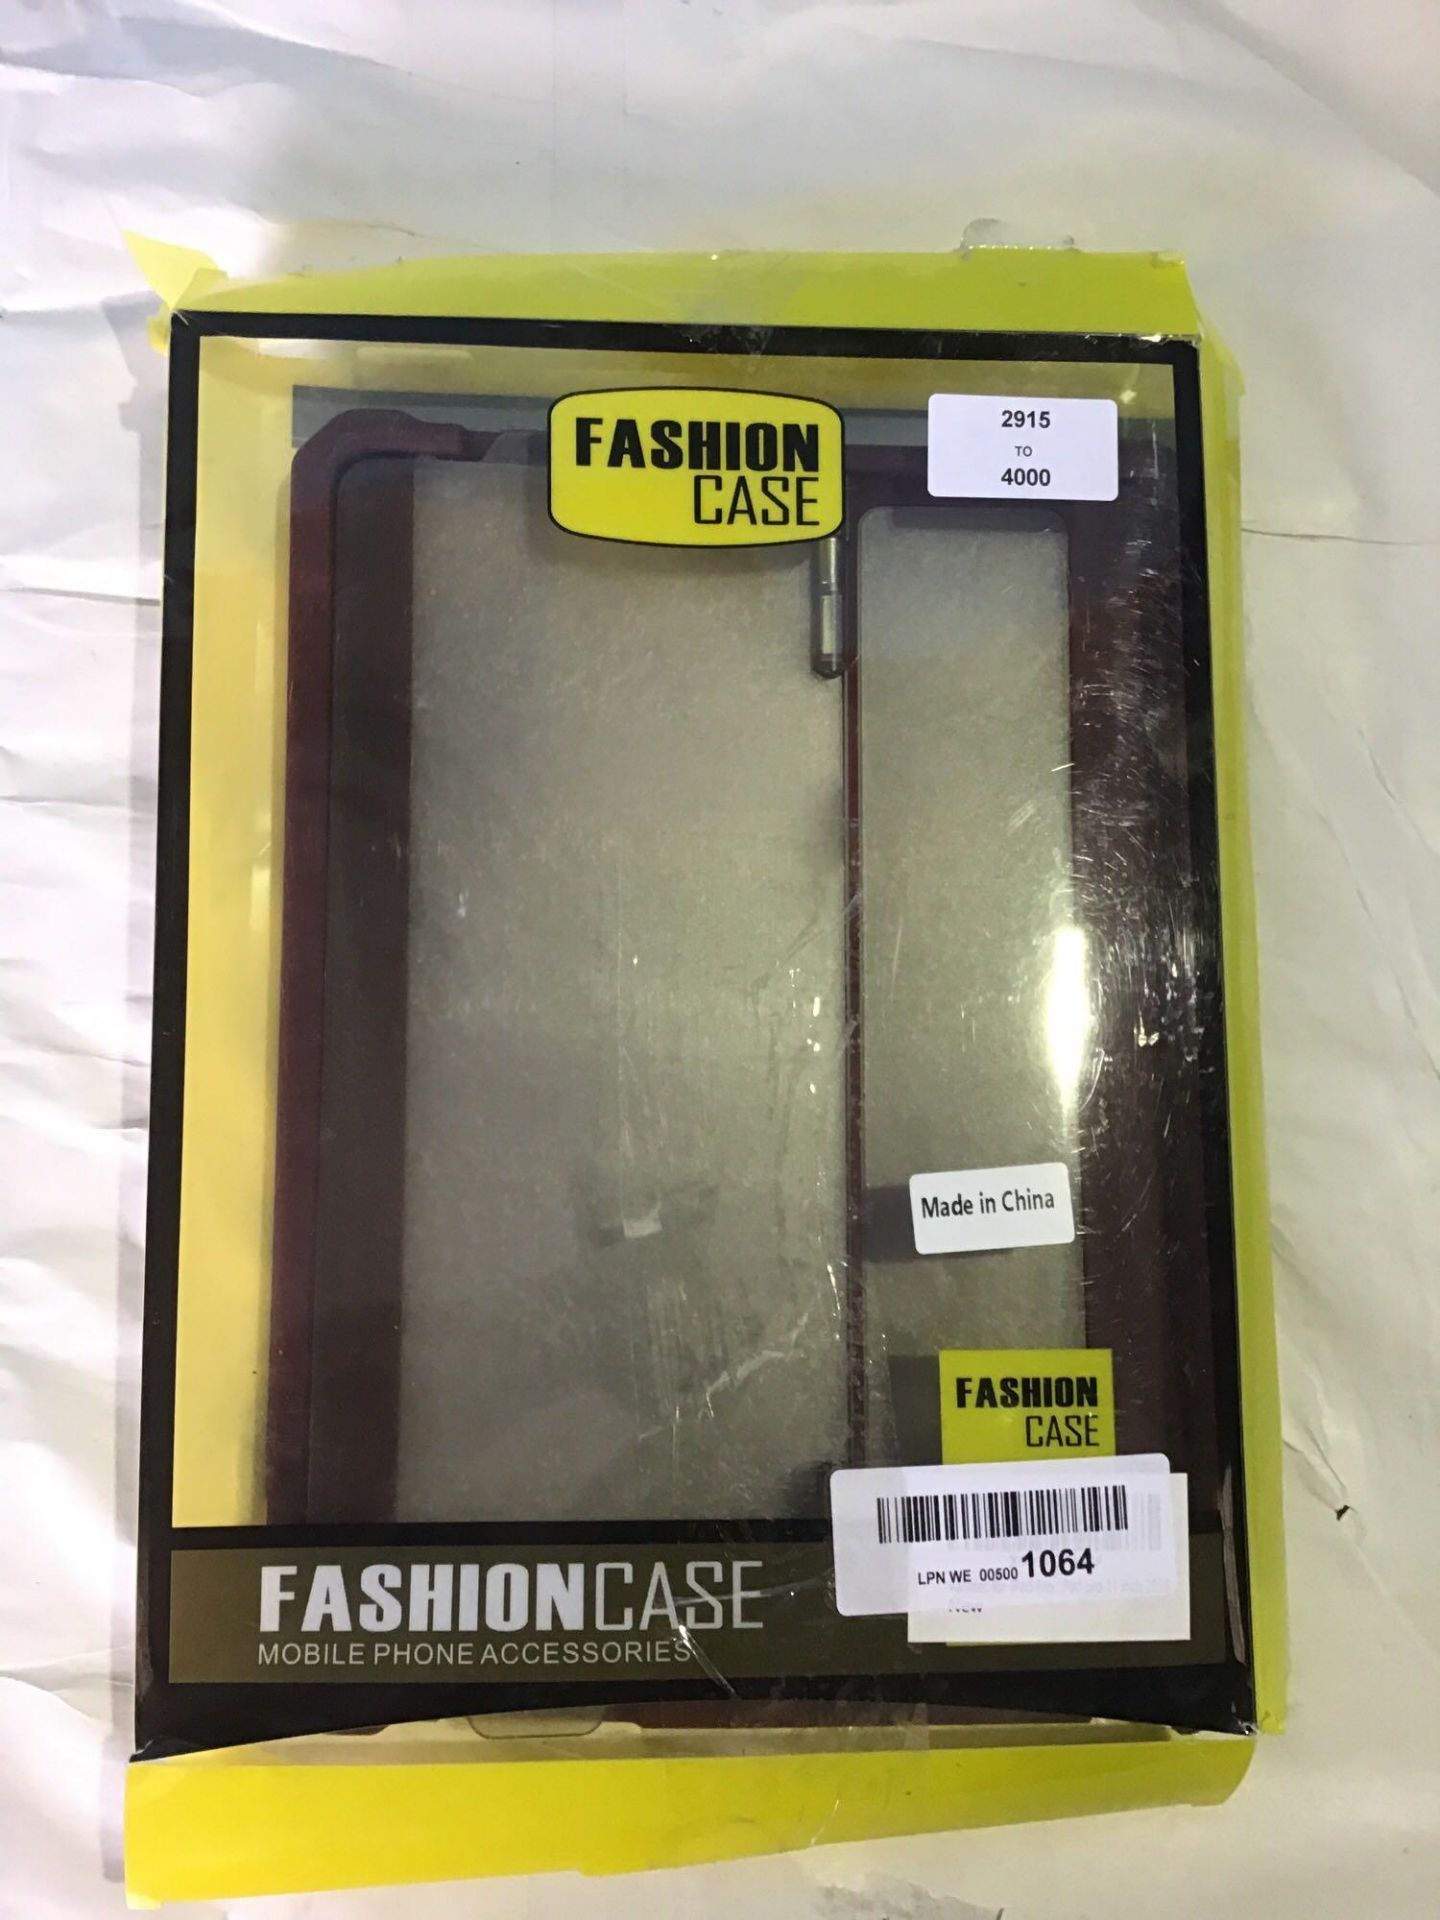 Fashion Case Mobile Phone Accesories